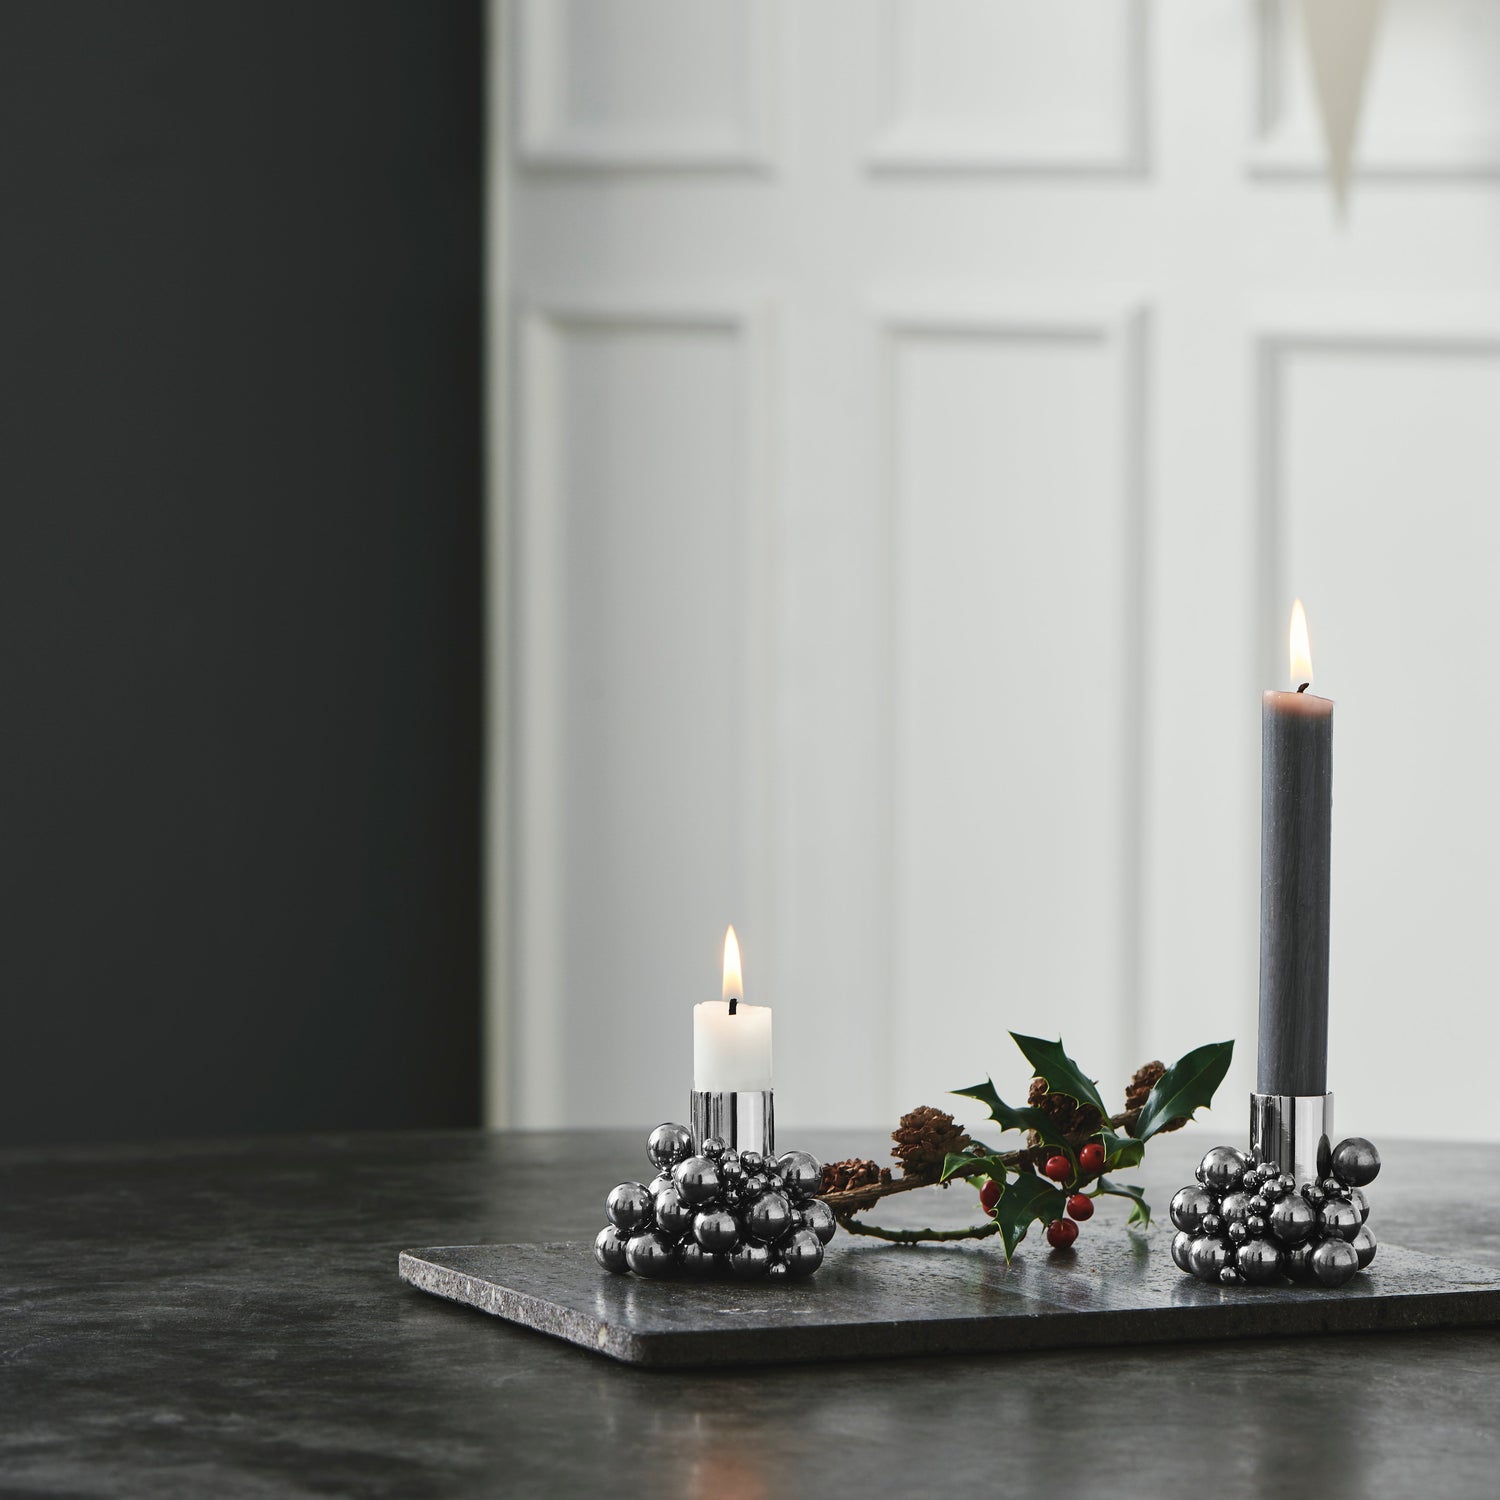 Would you want to try this? The design possibilities are endless with , floating christmas candle